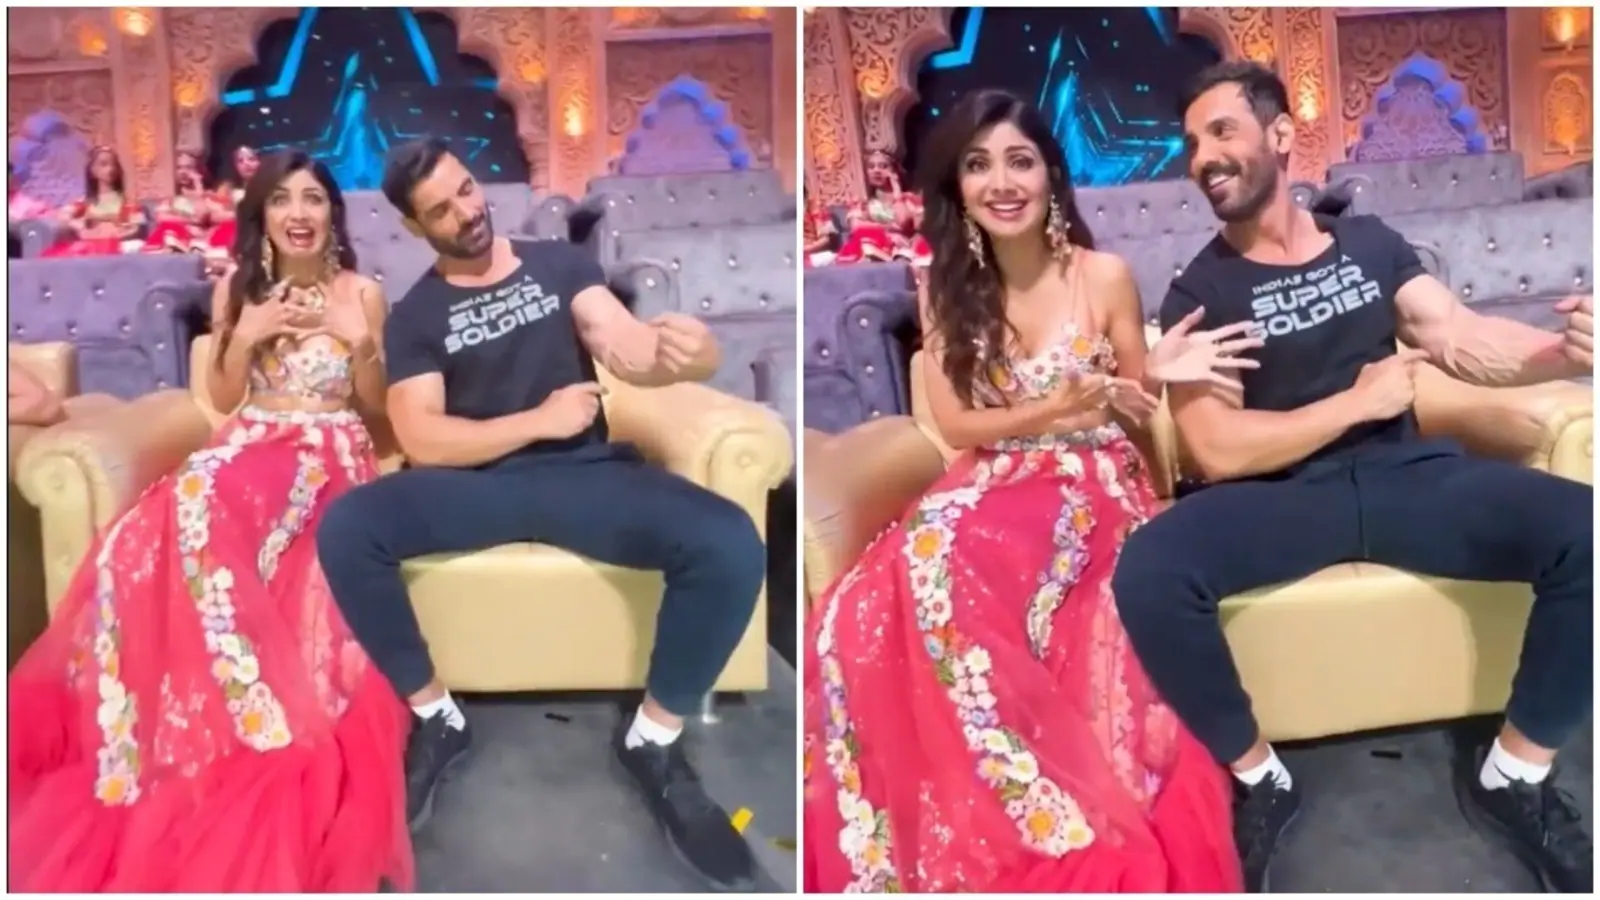 John Abraham makes Shilpa Shetty wince and scream by showing off his veiny arm on India’s Got Talent. Watch